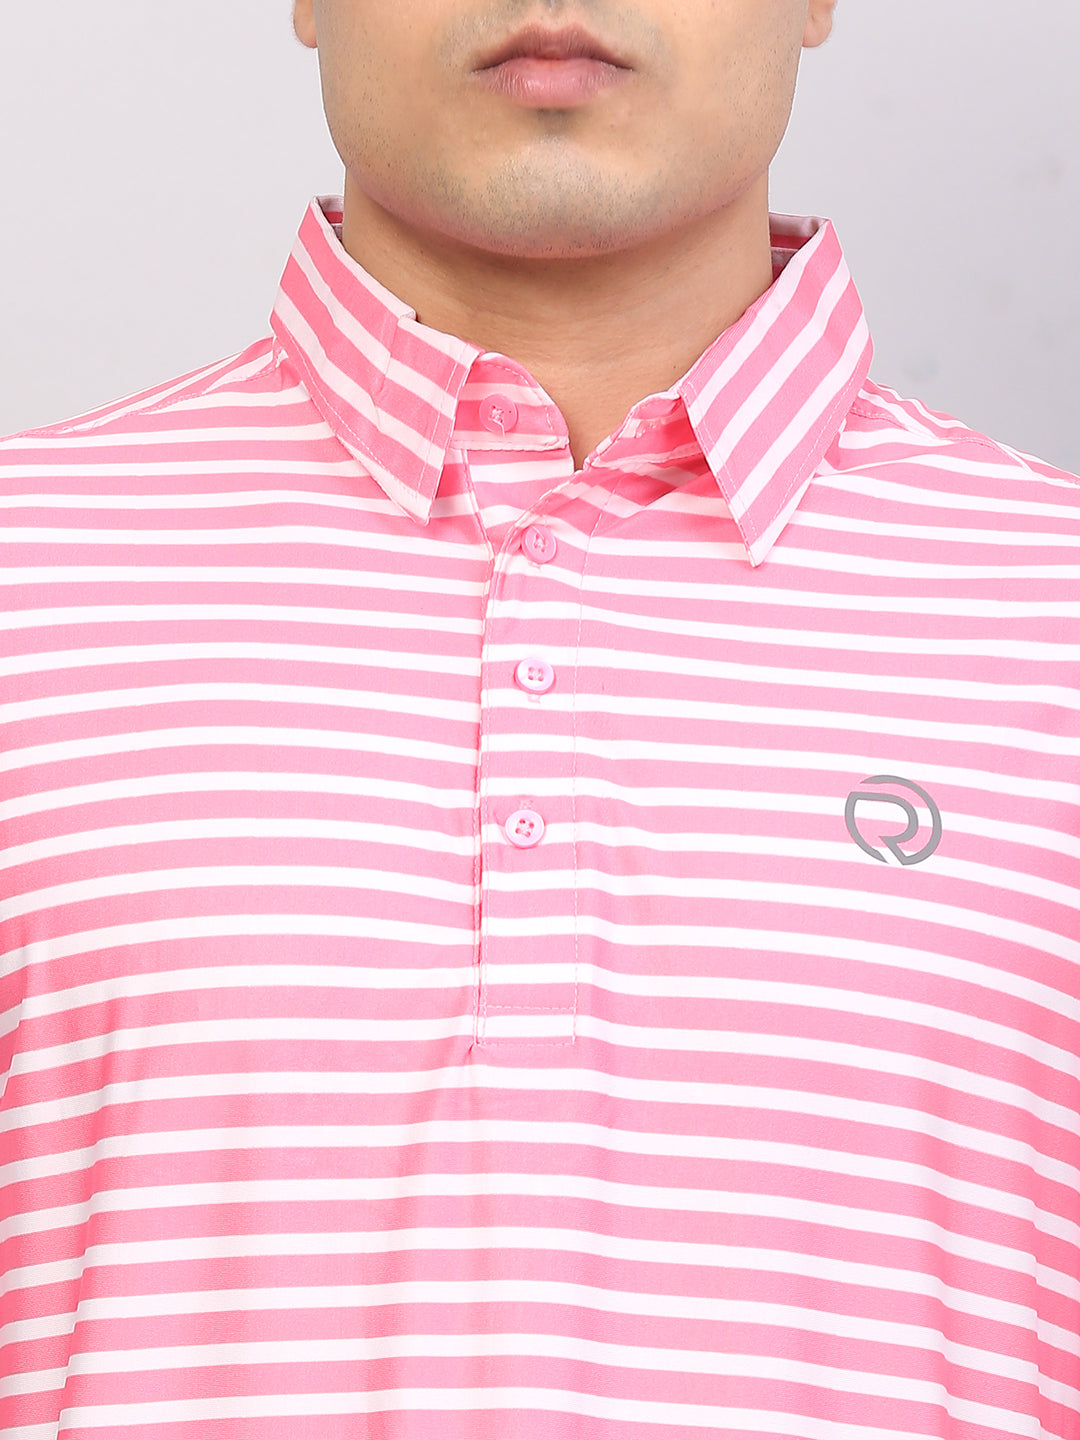 Printed Performance Sports Polo